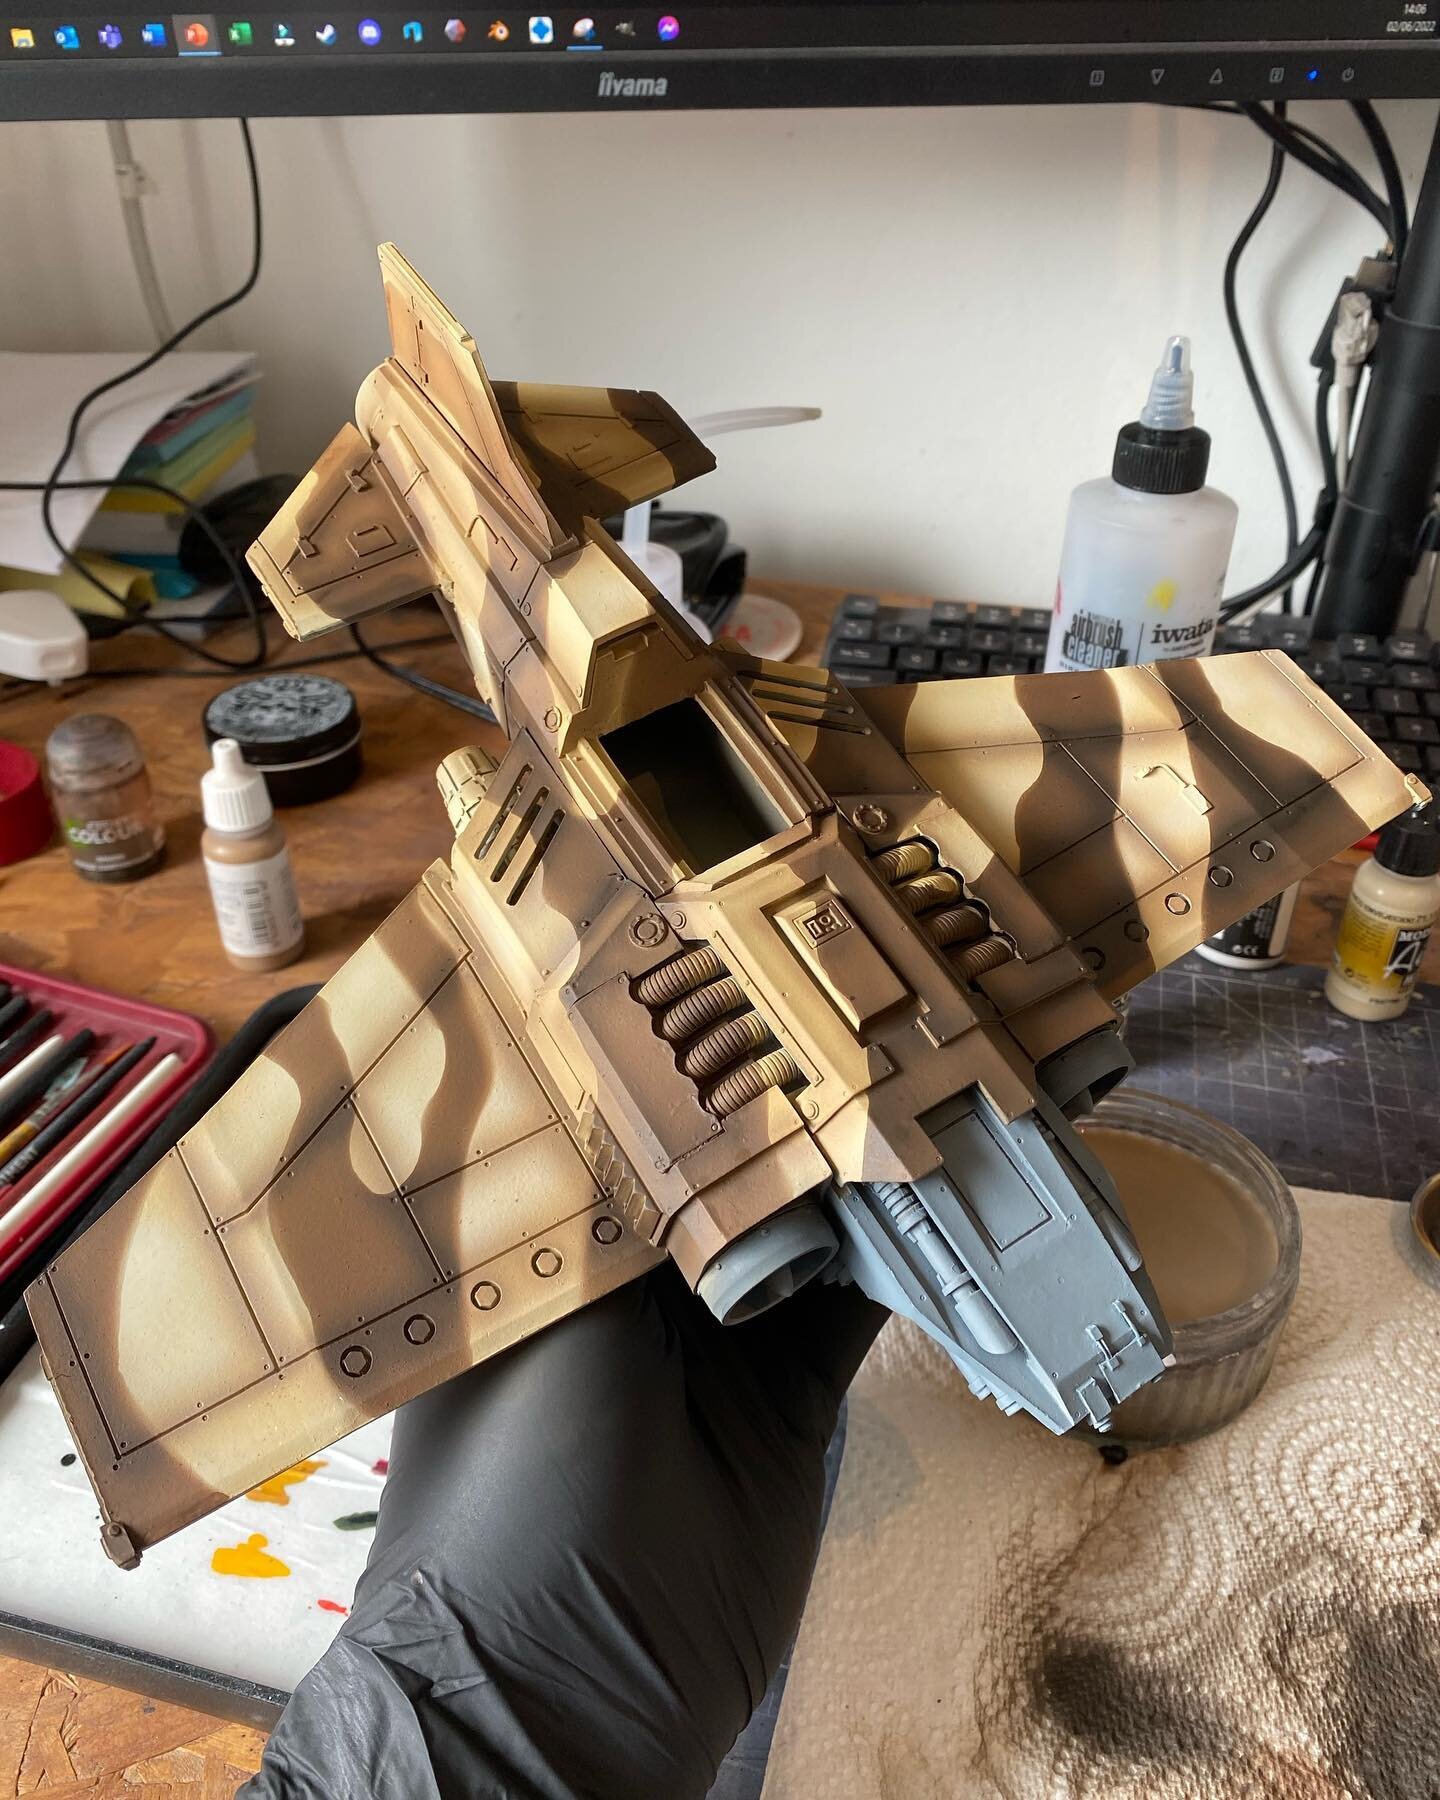 Getting there with the #camo on the #thunderbolt for #mortalsduty 
Might actually get everything done&hellip;😬

#thehobbybutterflies #hobbybutterflies #30k #horusheresy #hardforheresy #heresyisdead #heresylives #fullypaintedisforclosers #10minuteher